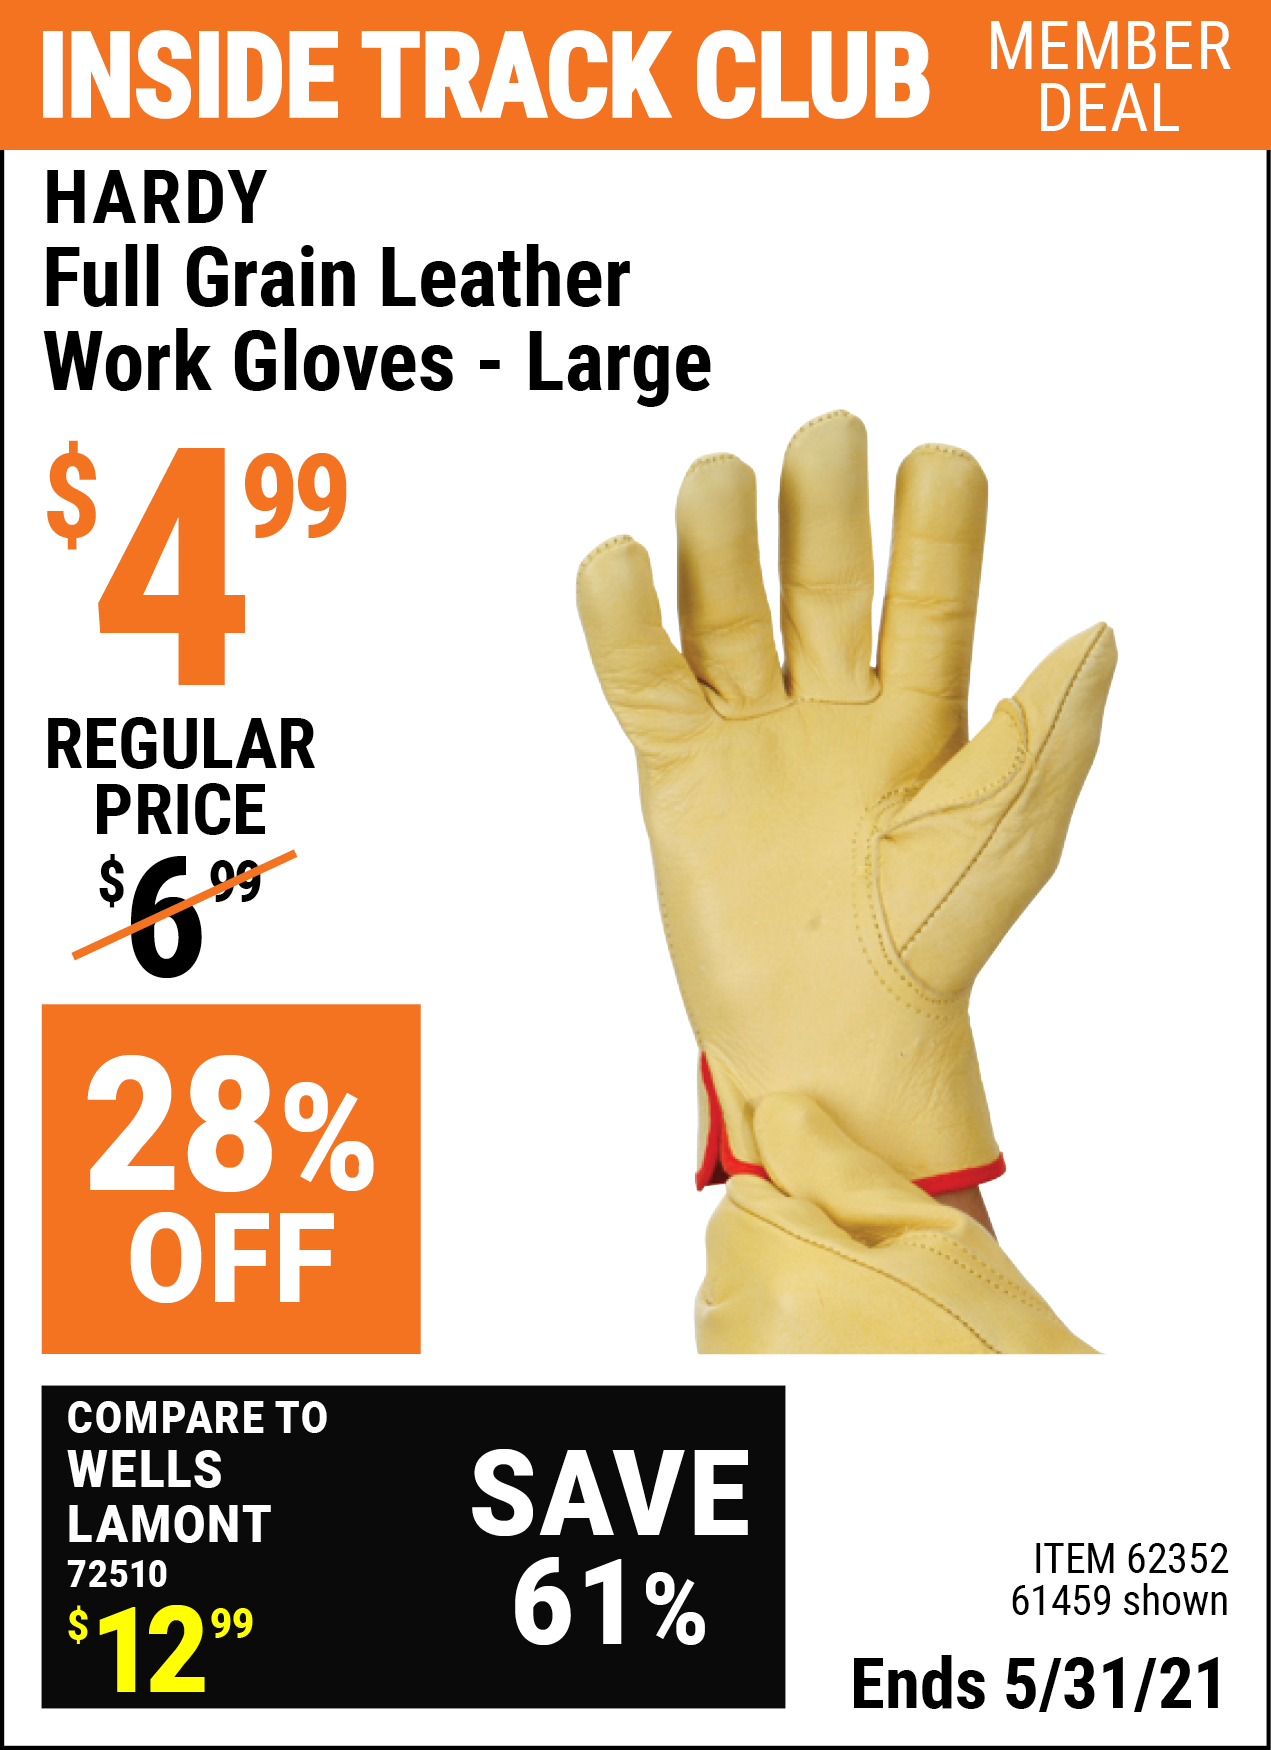 Inside Track Club members can buy the HARDY Full Grain Leather Work Gloves Large (Item 61459/62352/63153/63154) for $4.99, valid through 5/31/2021.